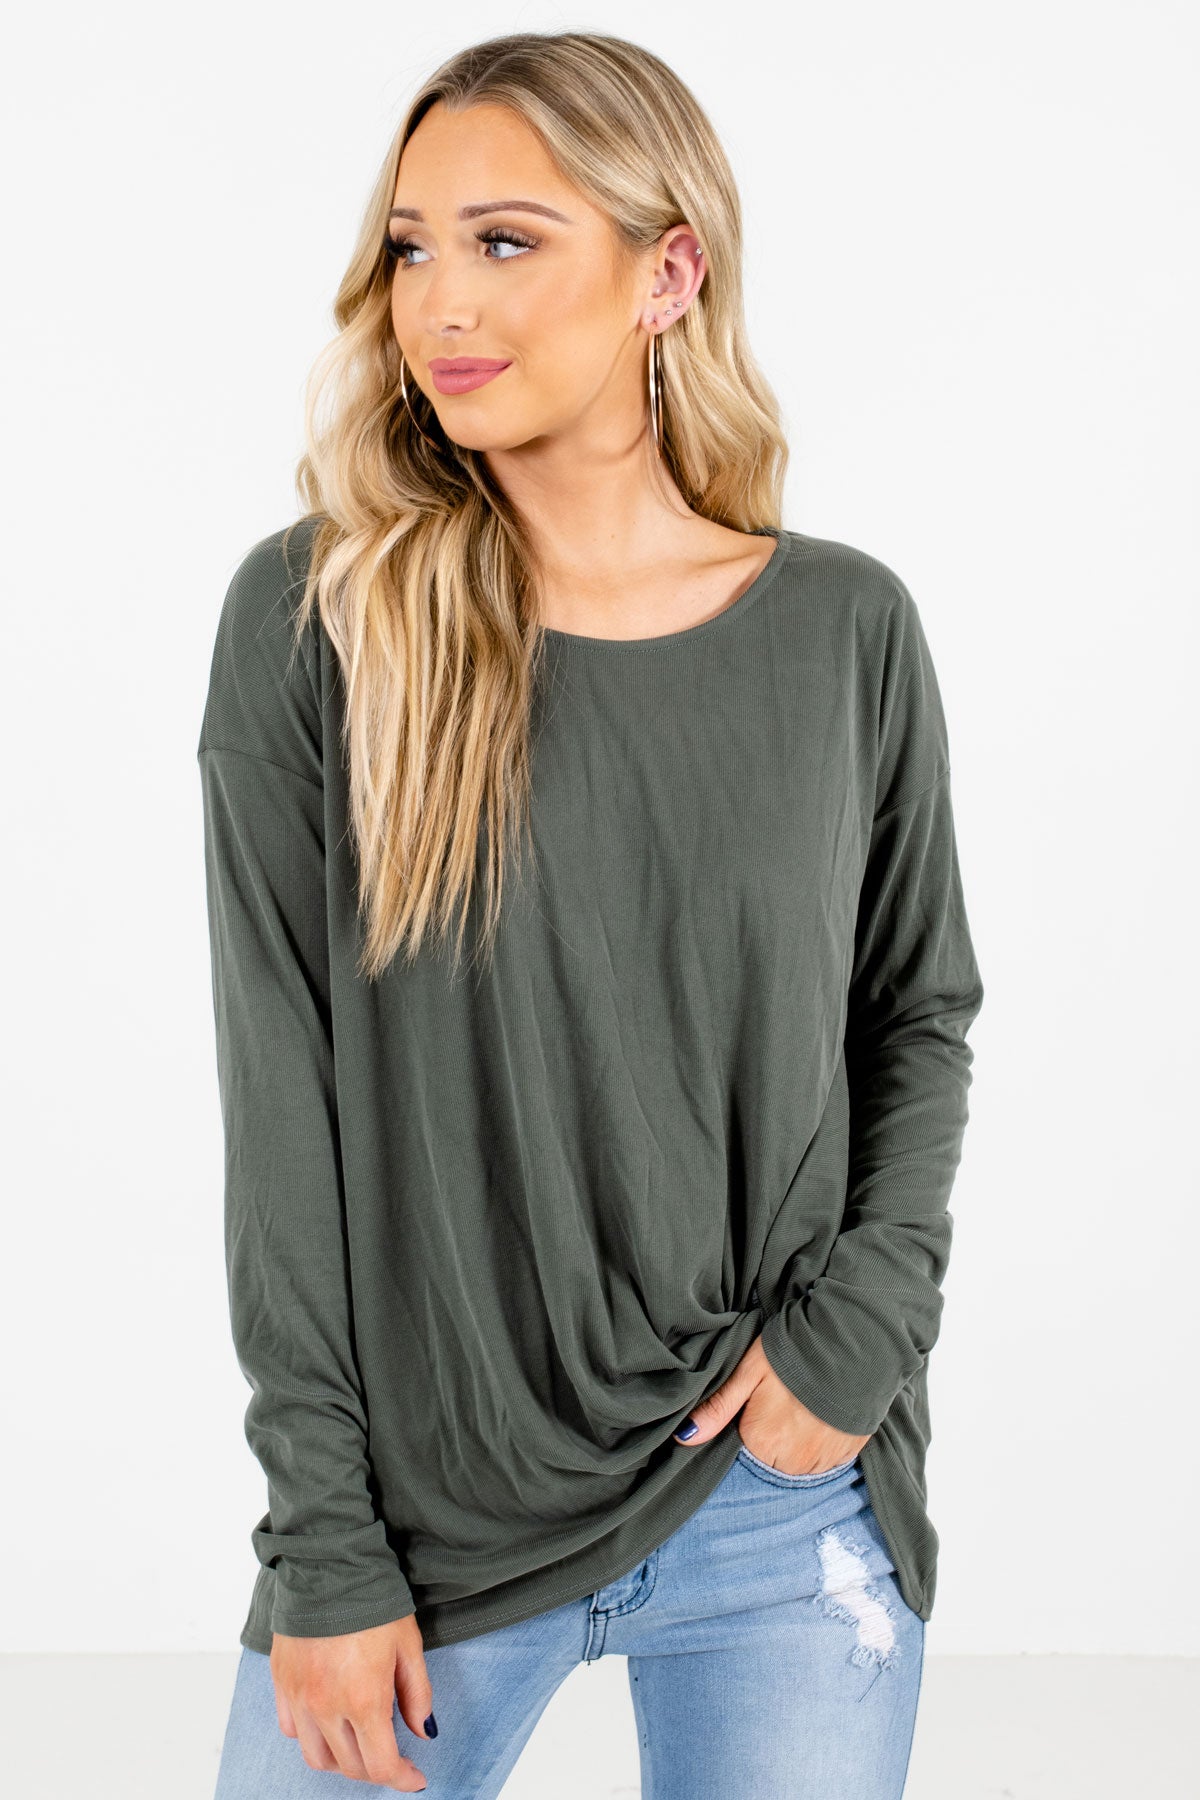 Green Infinity Knot Detail Boutique Tops for Women